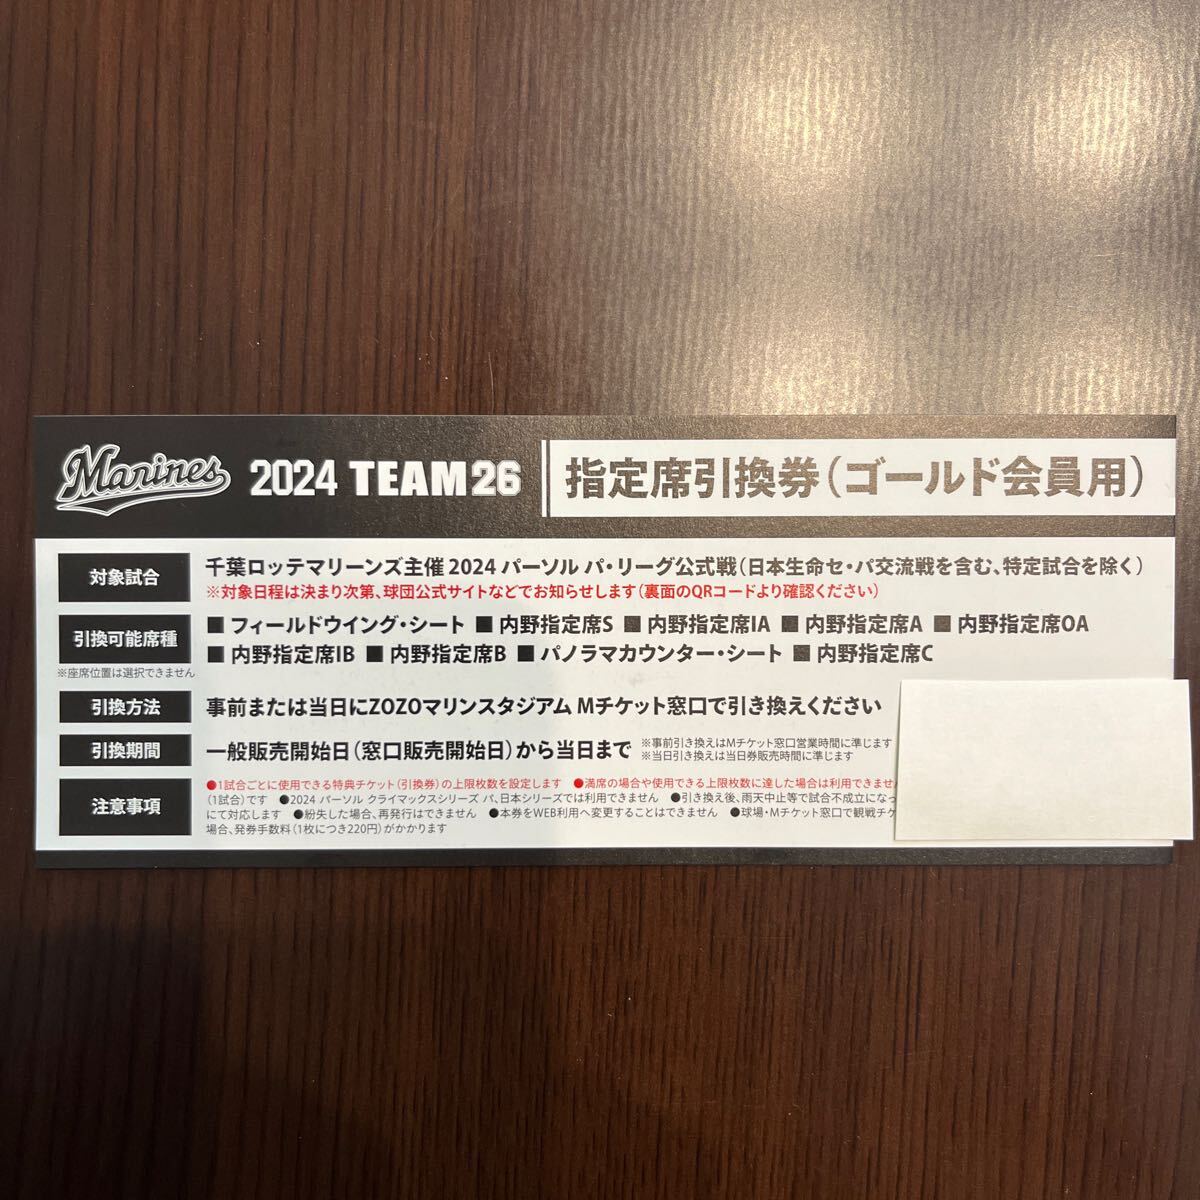  total 7 sheets Chiba Lotte Marines designation seat coupon Gold member TEAM26